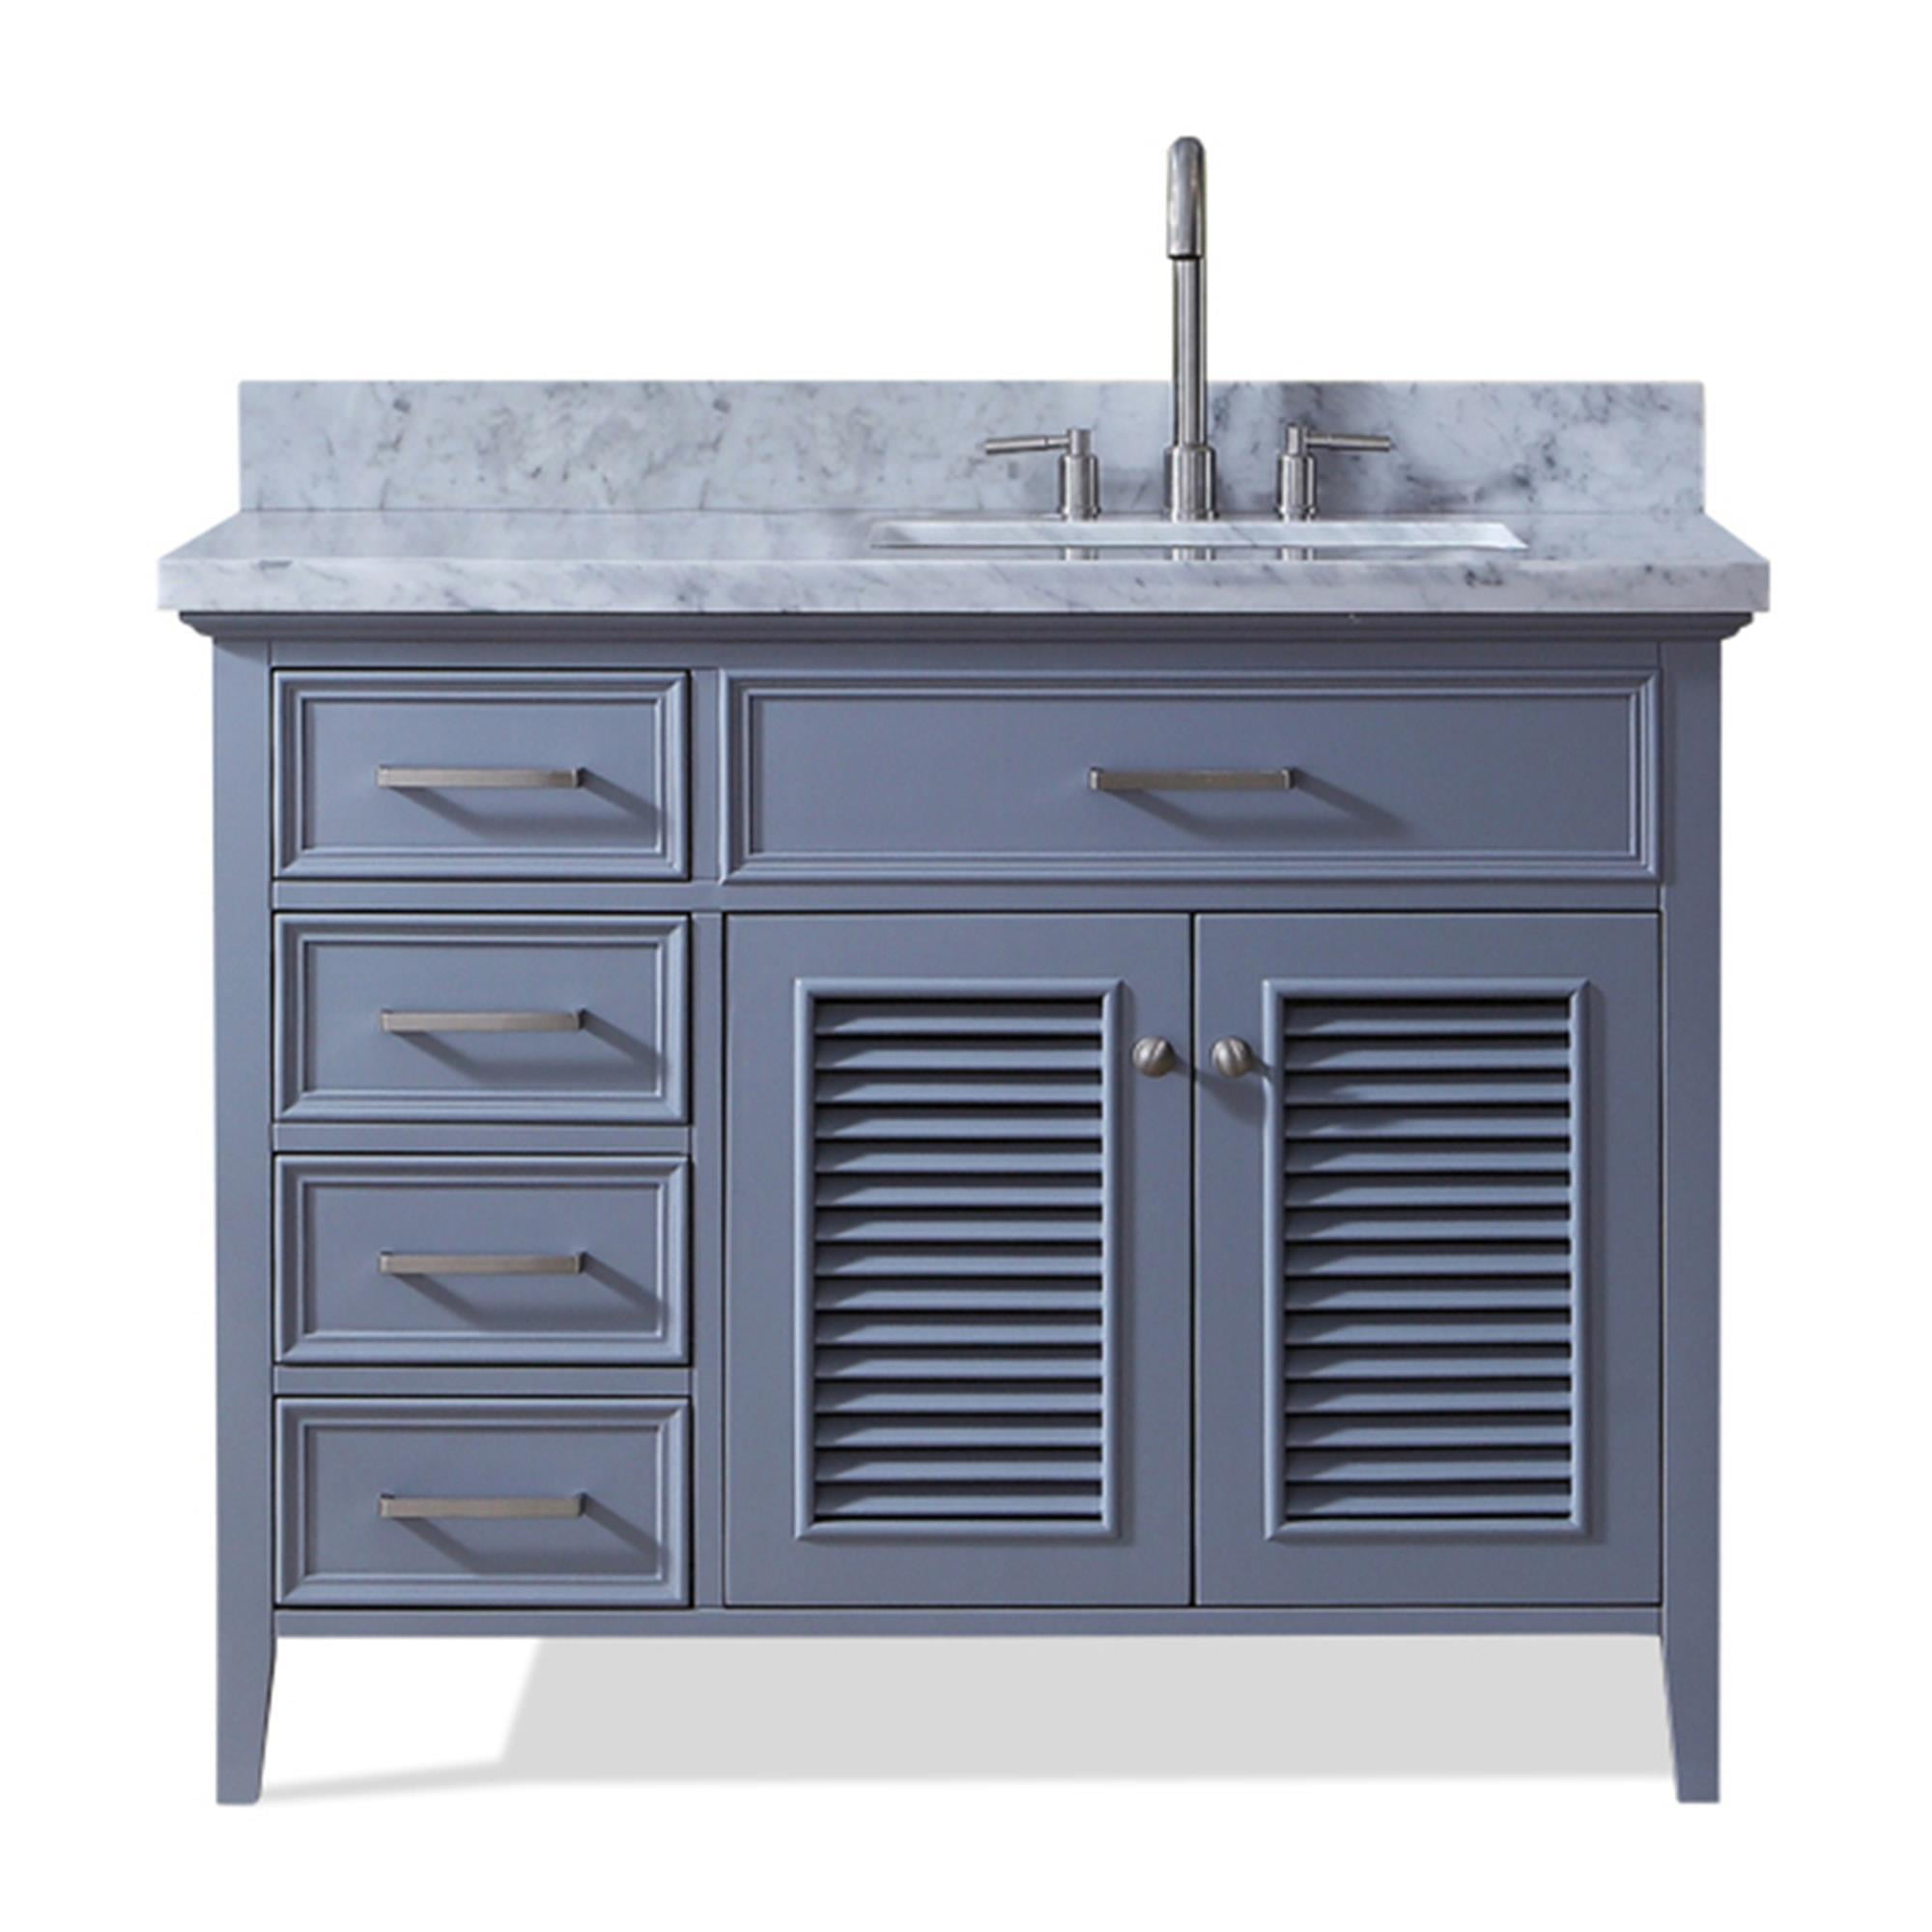 48 Inch Bathroom Vanity Right Side Sink / Pin on BATHROOMS - Find the ...